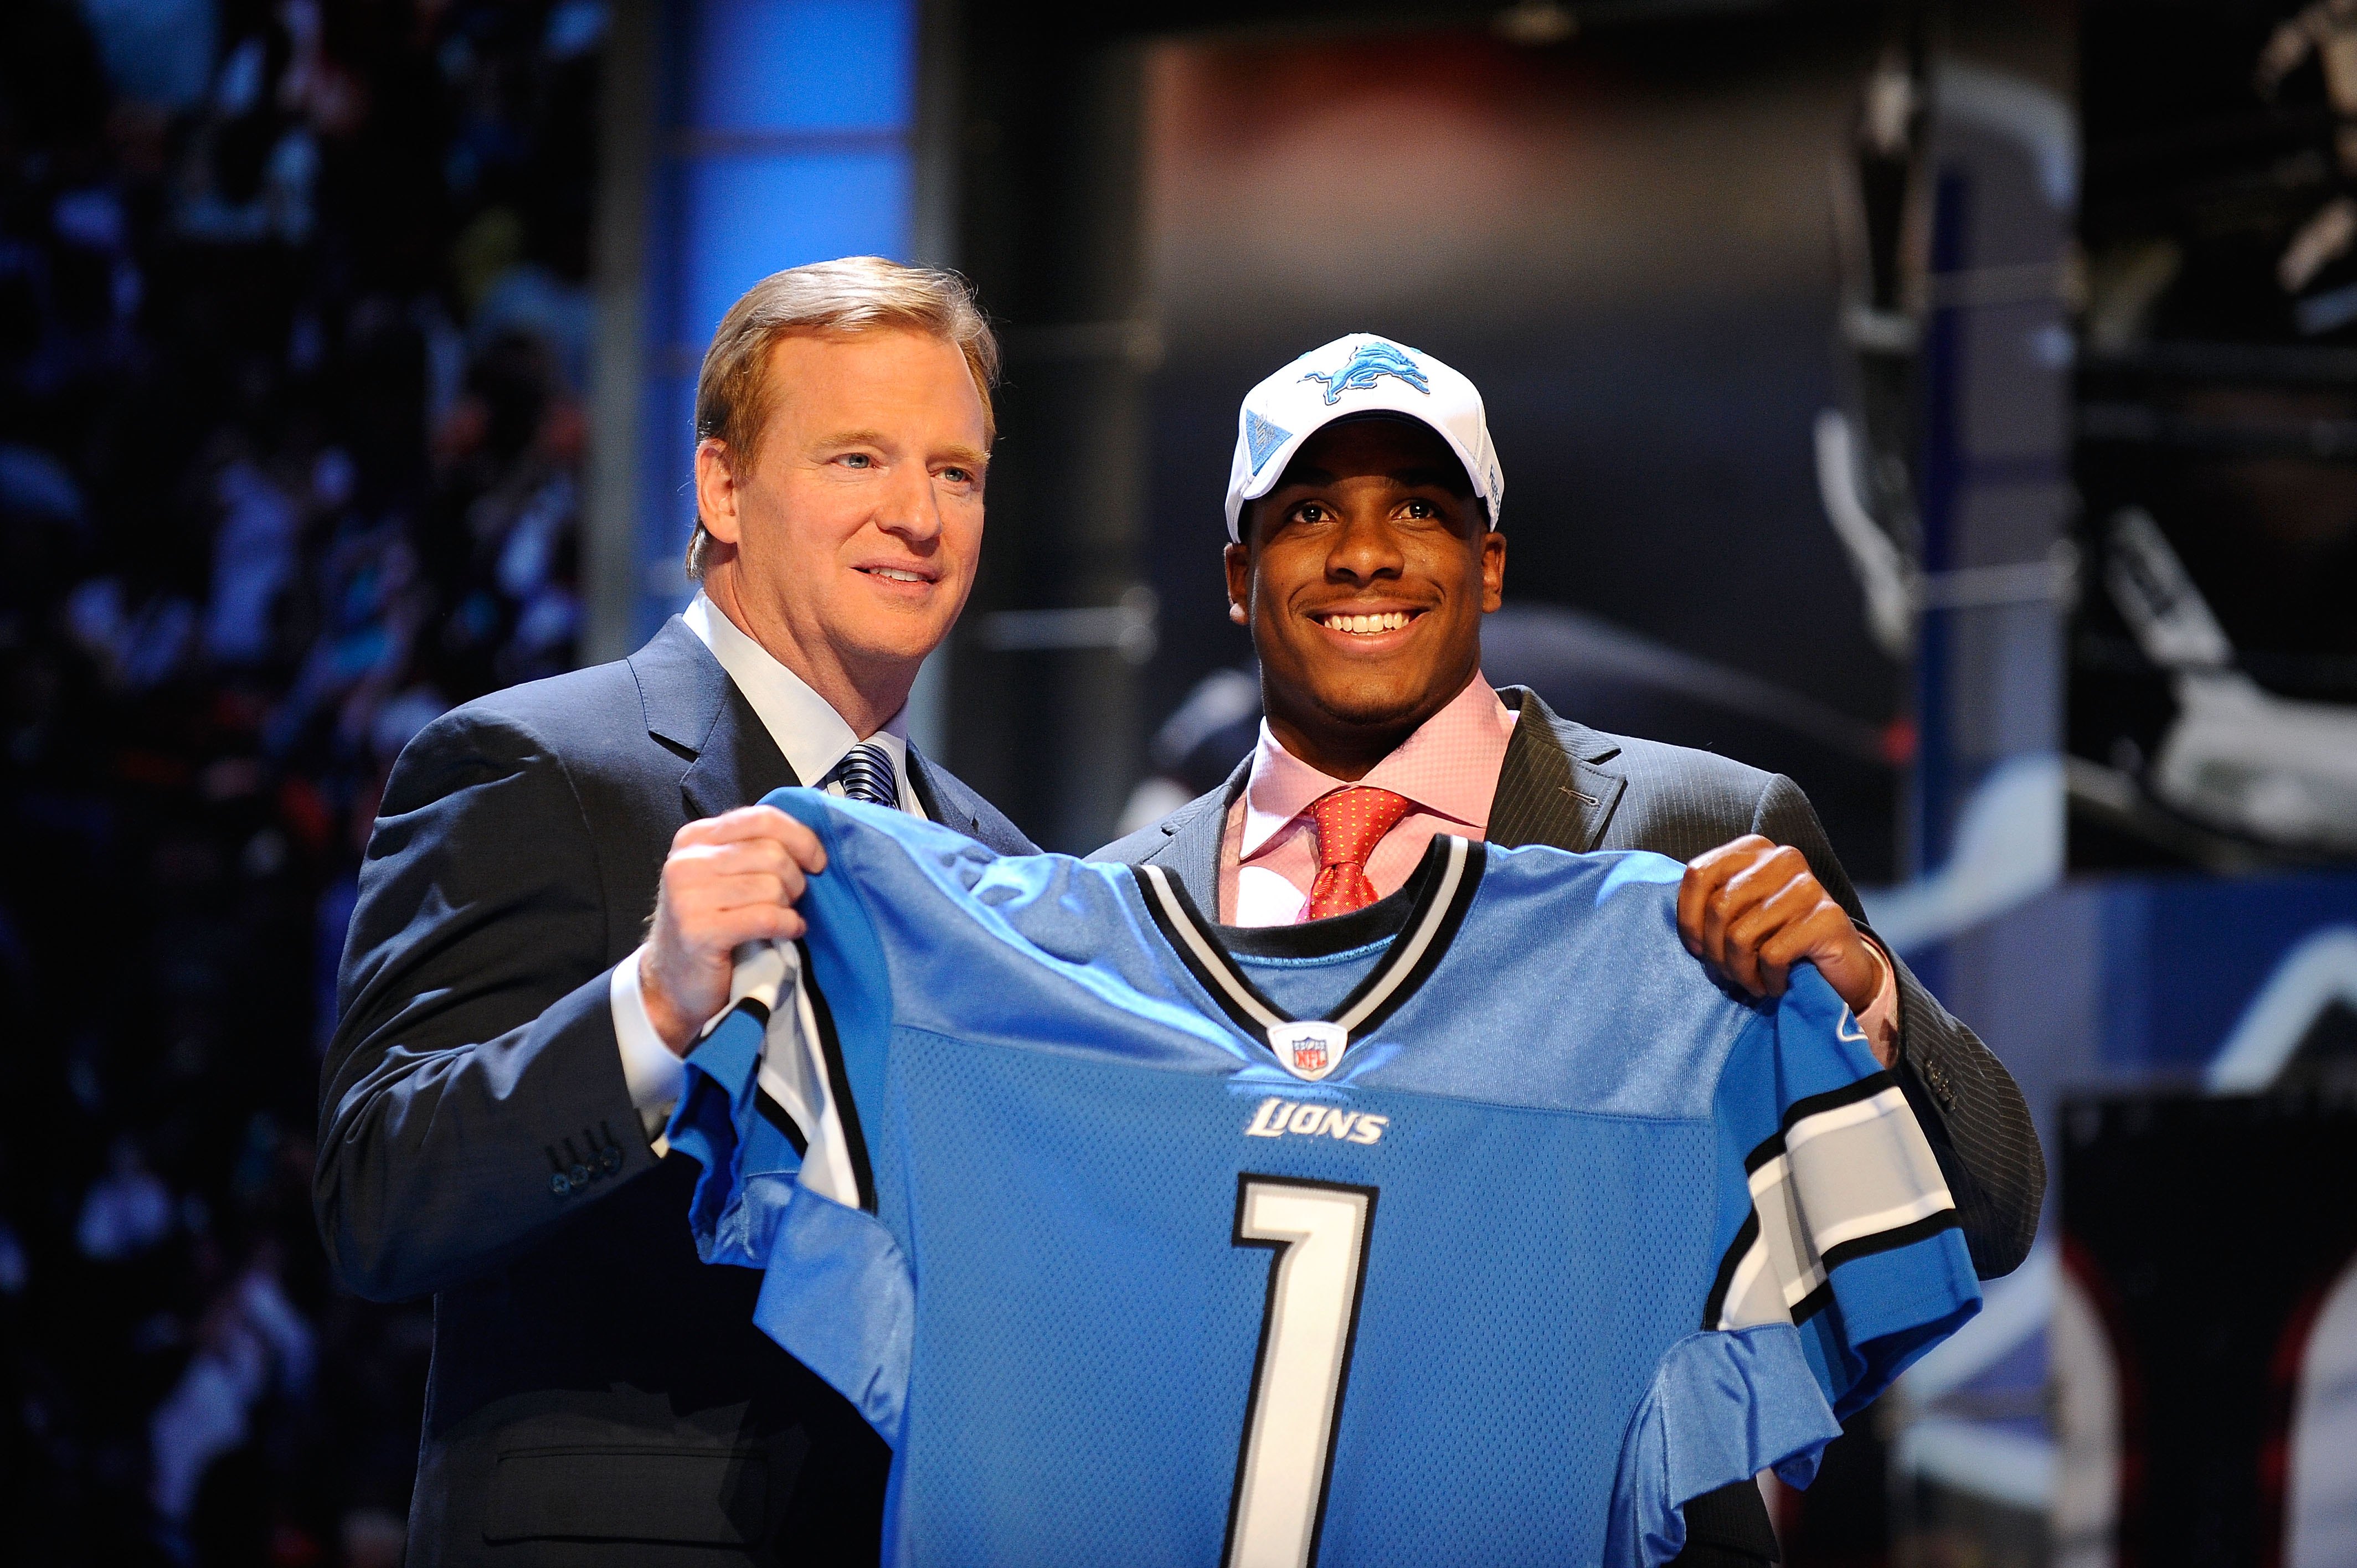 NEW YORK - APRIL 22:  Jahvid Best (R) from the California Golden Bears poses with NFL Commissioner Roger Goodell as they hold up a Detroit Lions jersey after the Lions selected Best number 30 overall during the first round of the 2010 NFL Draft at Radio C